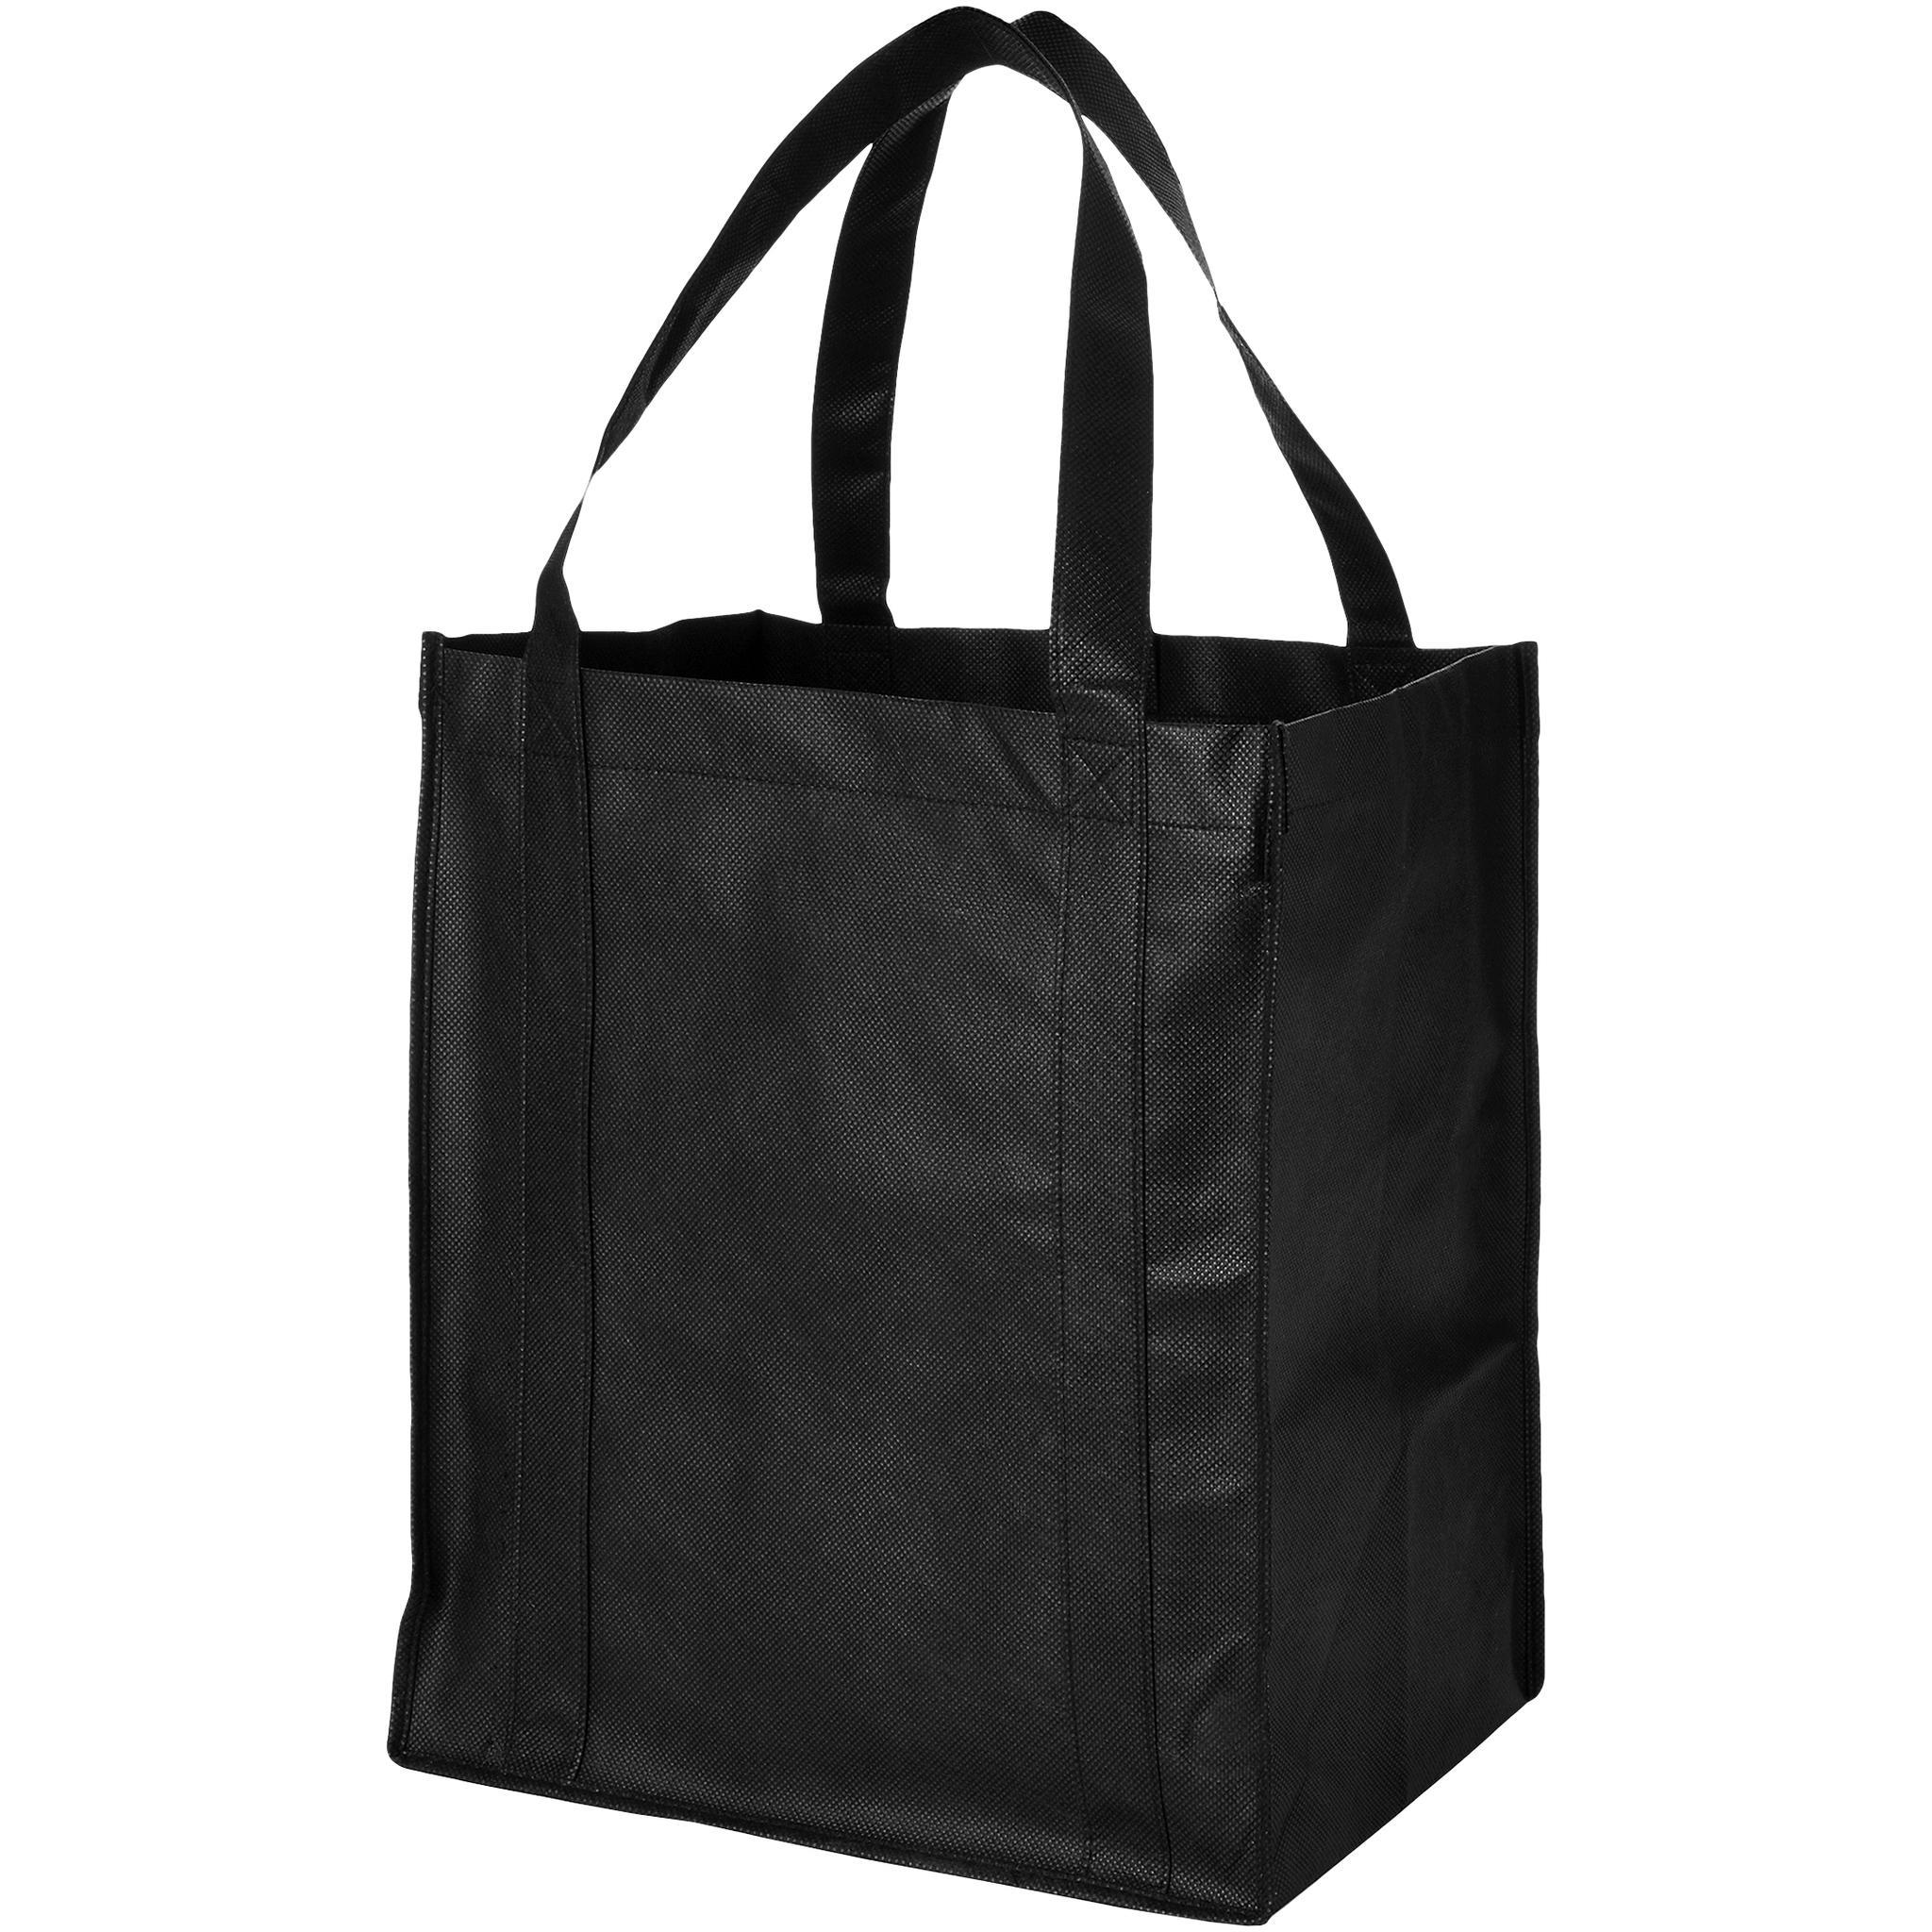 Bullet Liberty Non Woven Grocery Tote (Pack Of 2) (Solid Black) (33 x 25.4 x 36.8 cm)